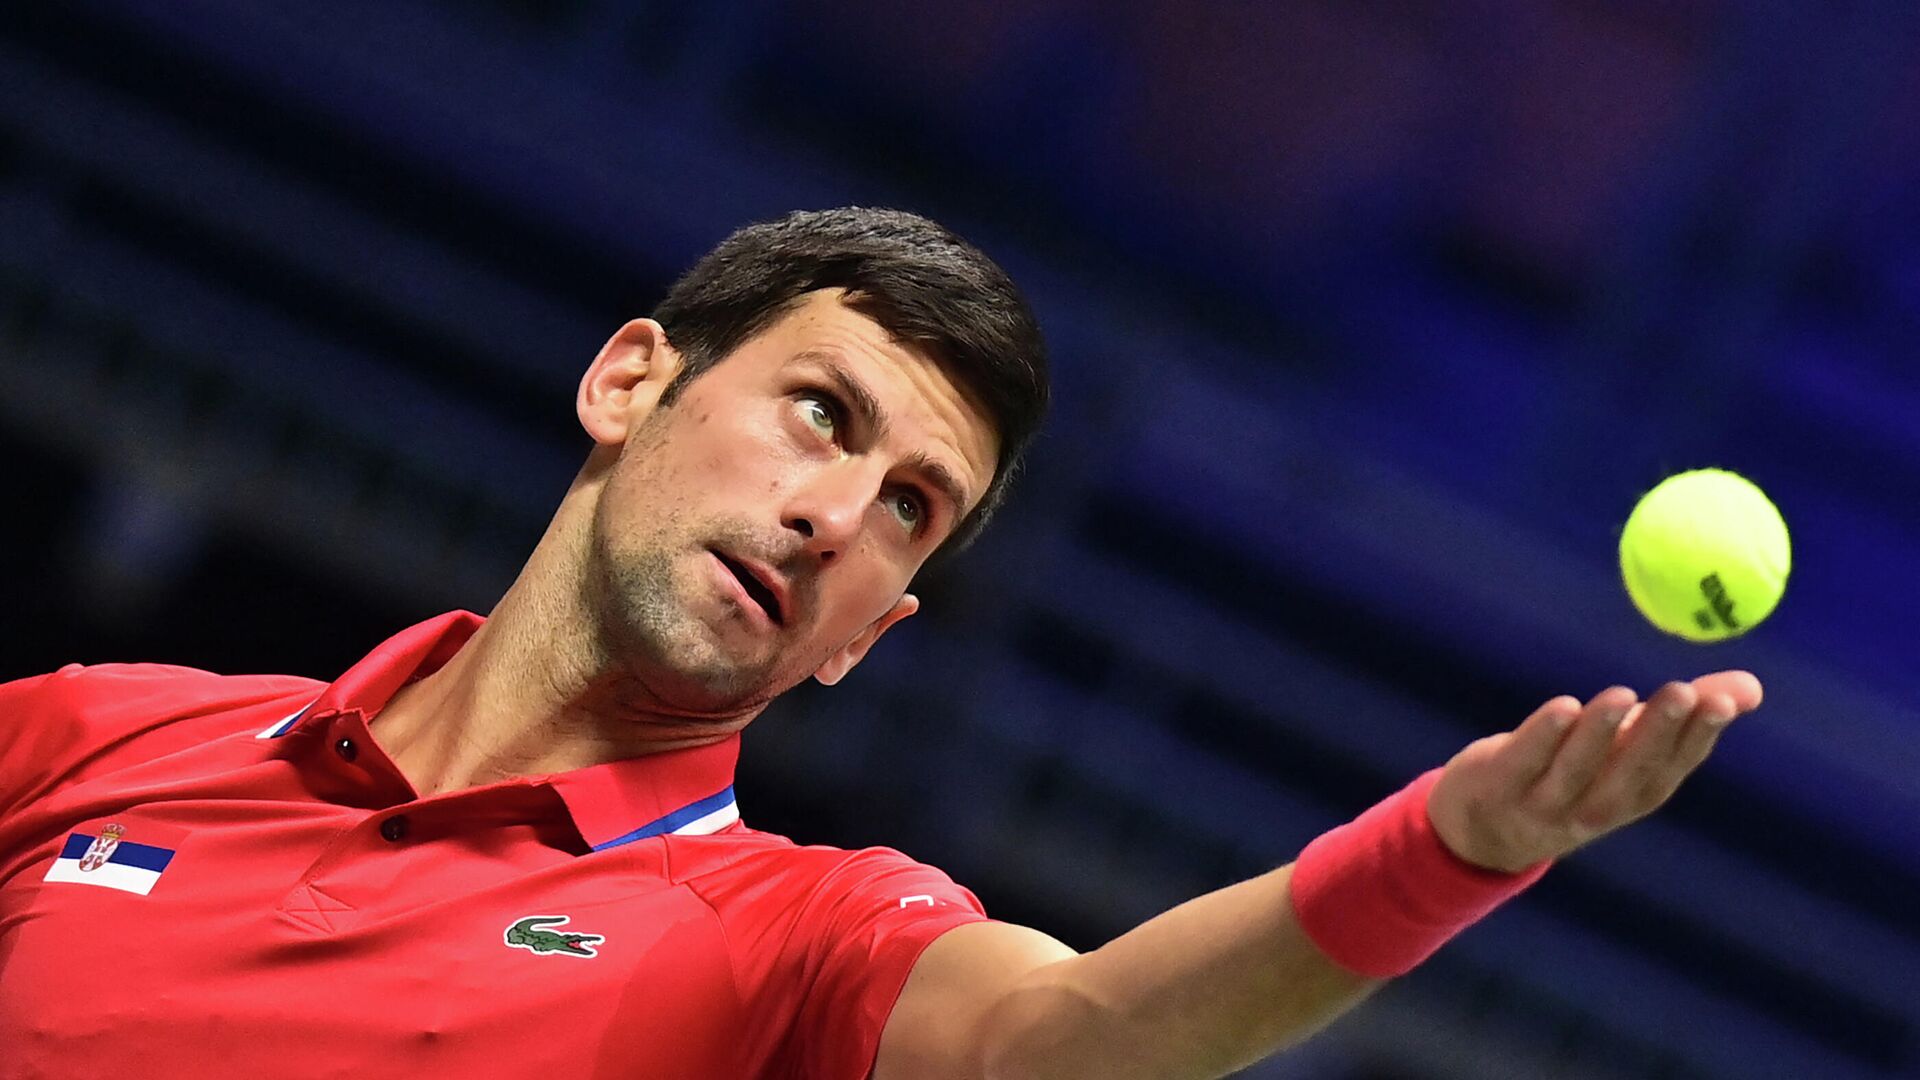 Serbia's Novak Djokovic serves the ball to Germany's Jan-Lennard Struff (not pictured) during the men's singles group stage match between Serbia and Germany of the Davis Cup tennis tournament in Innsbruck, Austria, on November 27, 2021 - Sputnik International, 1920, 16.01.2022